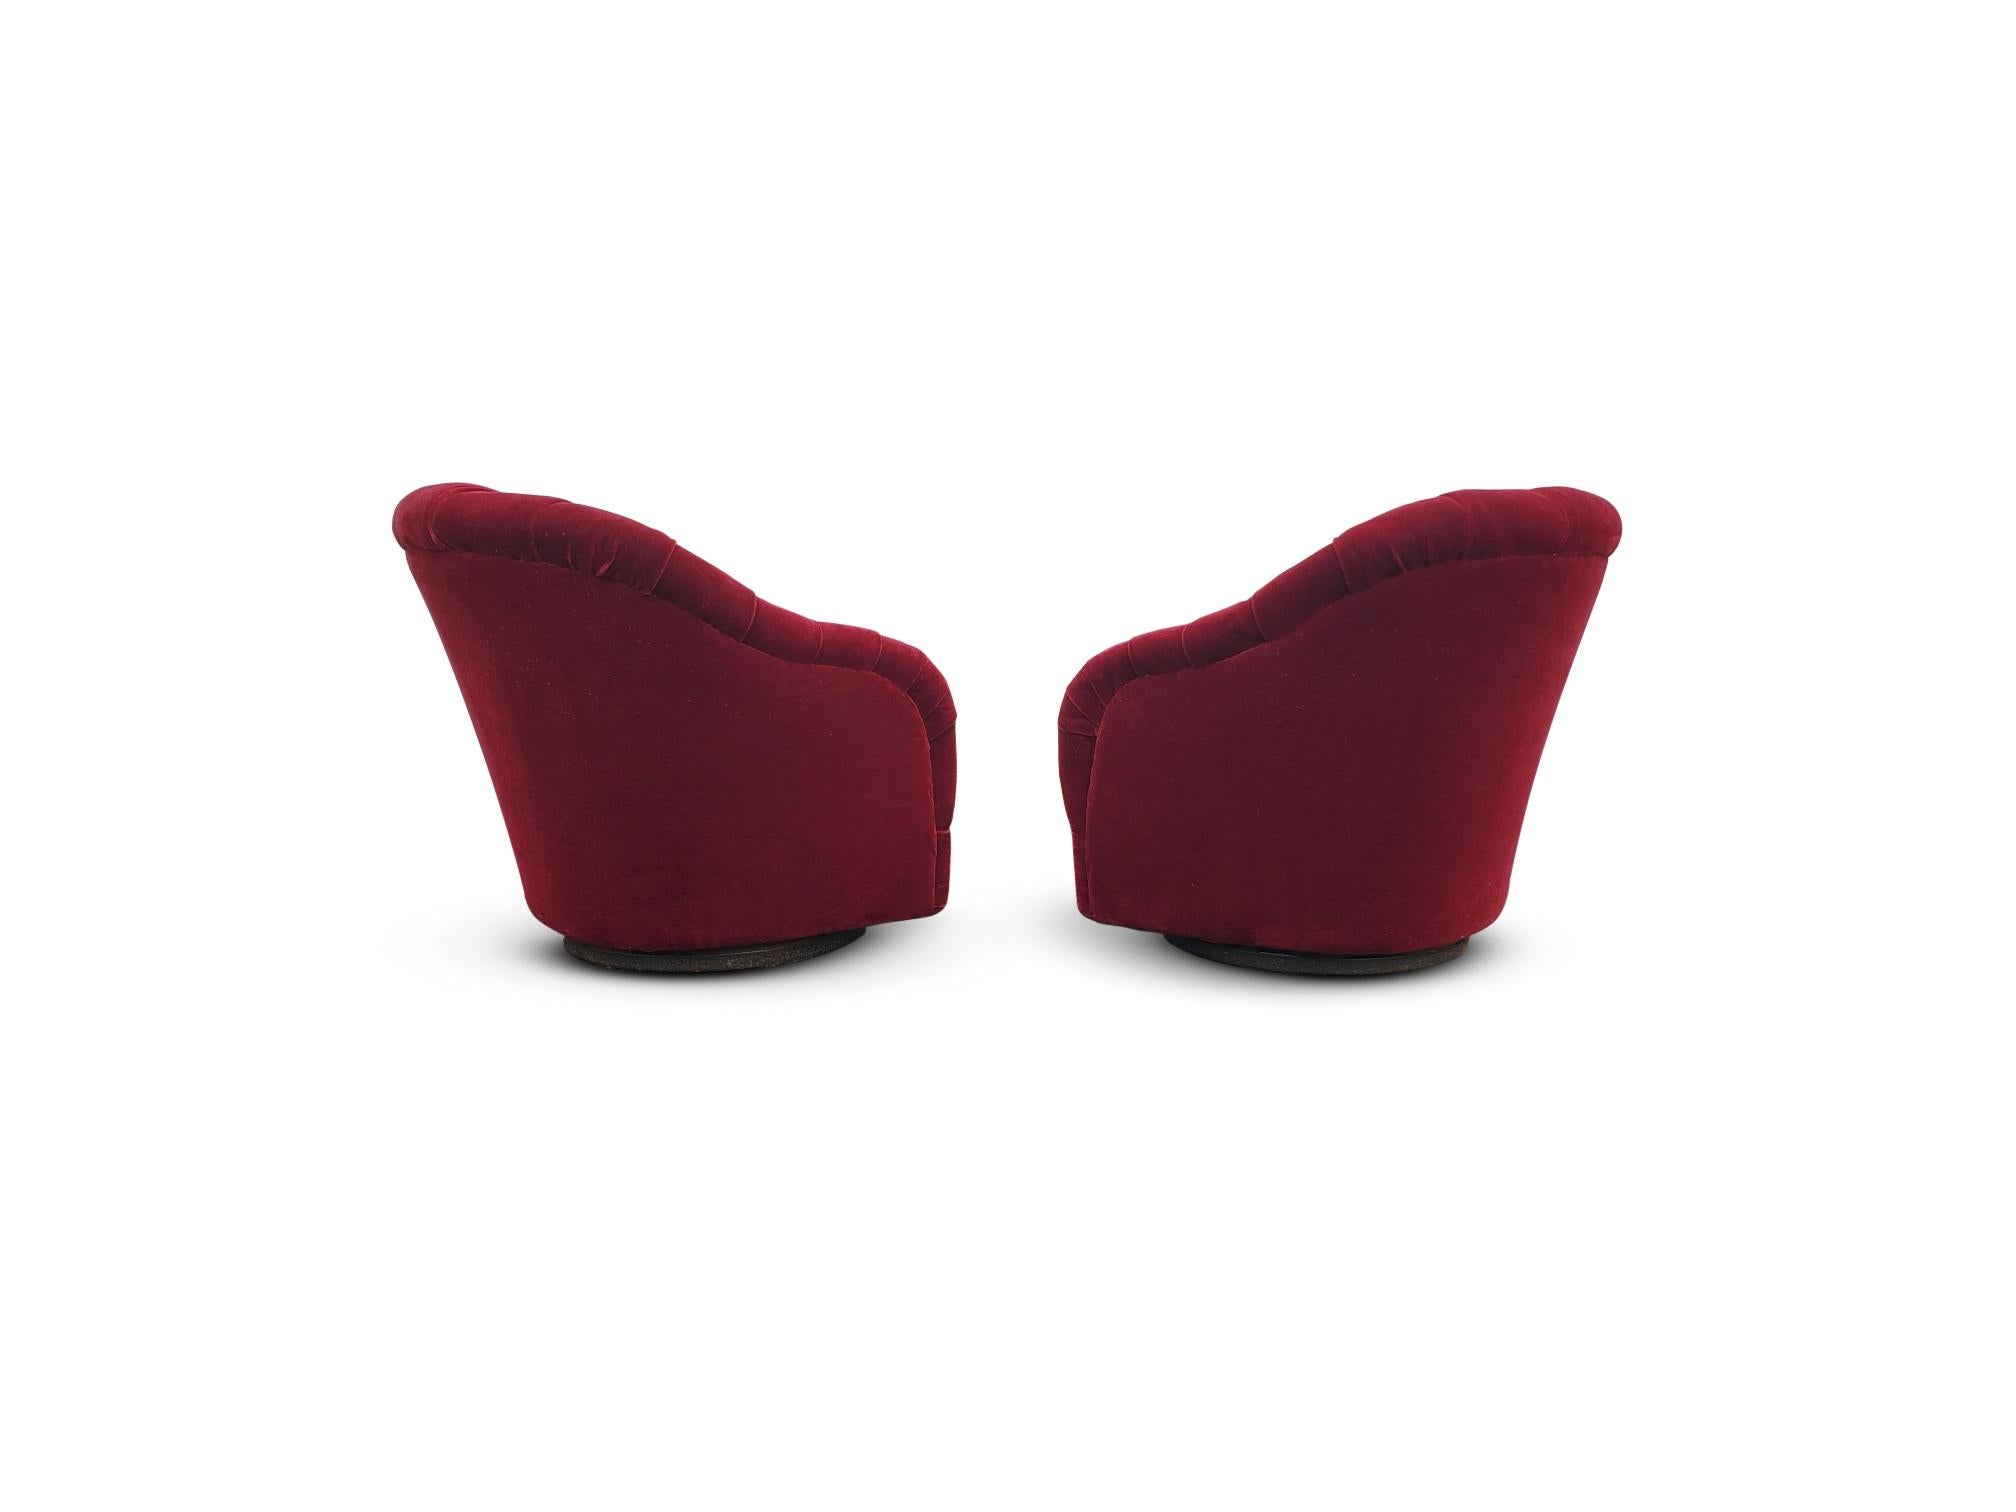 Pair of Ward Bennett Tufted Swivel Lounge Chairs   For Sale 2